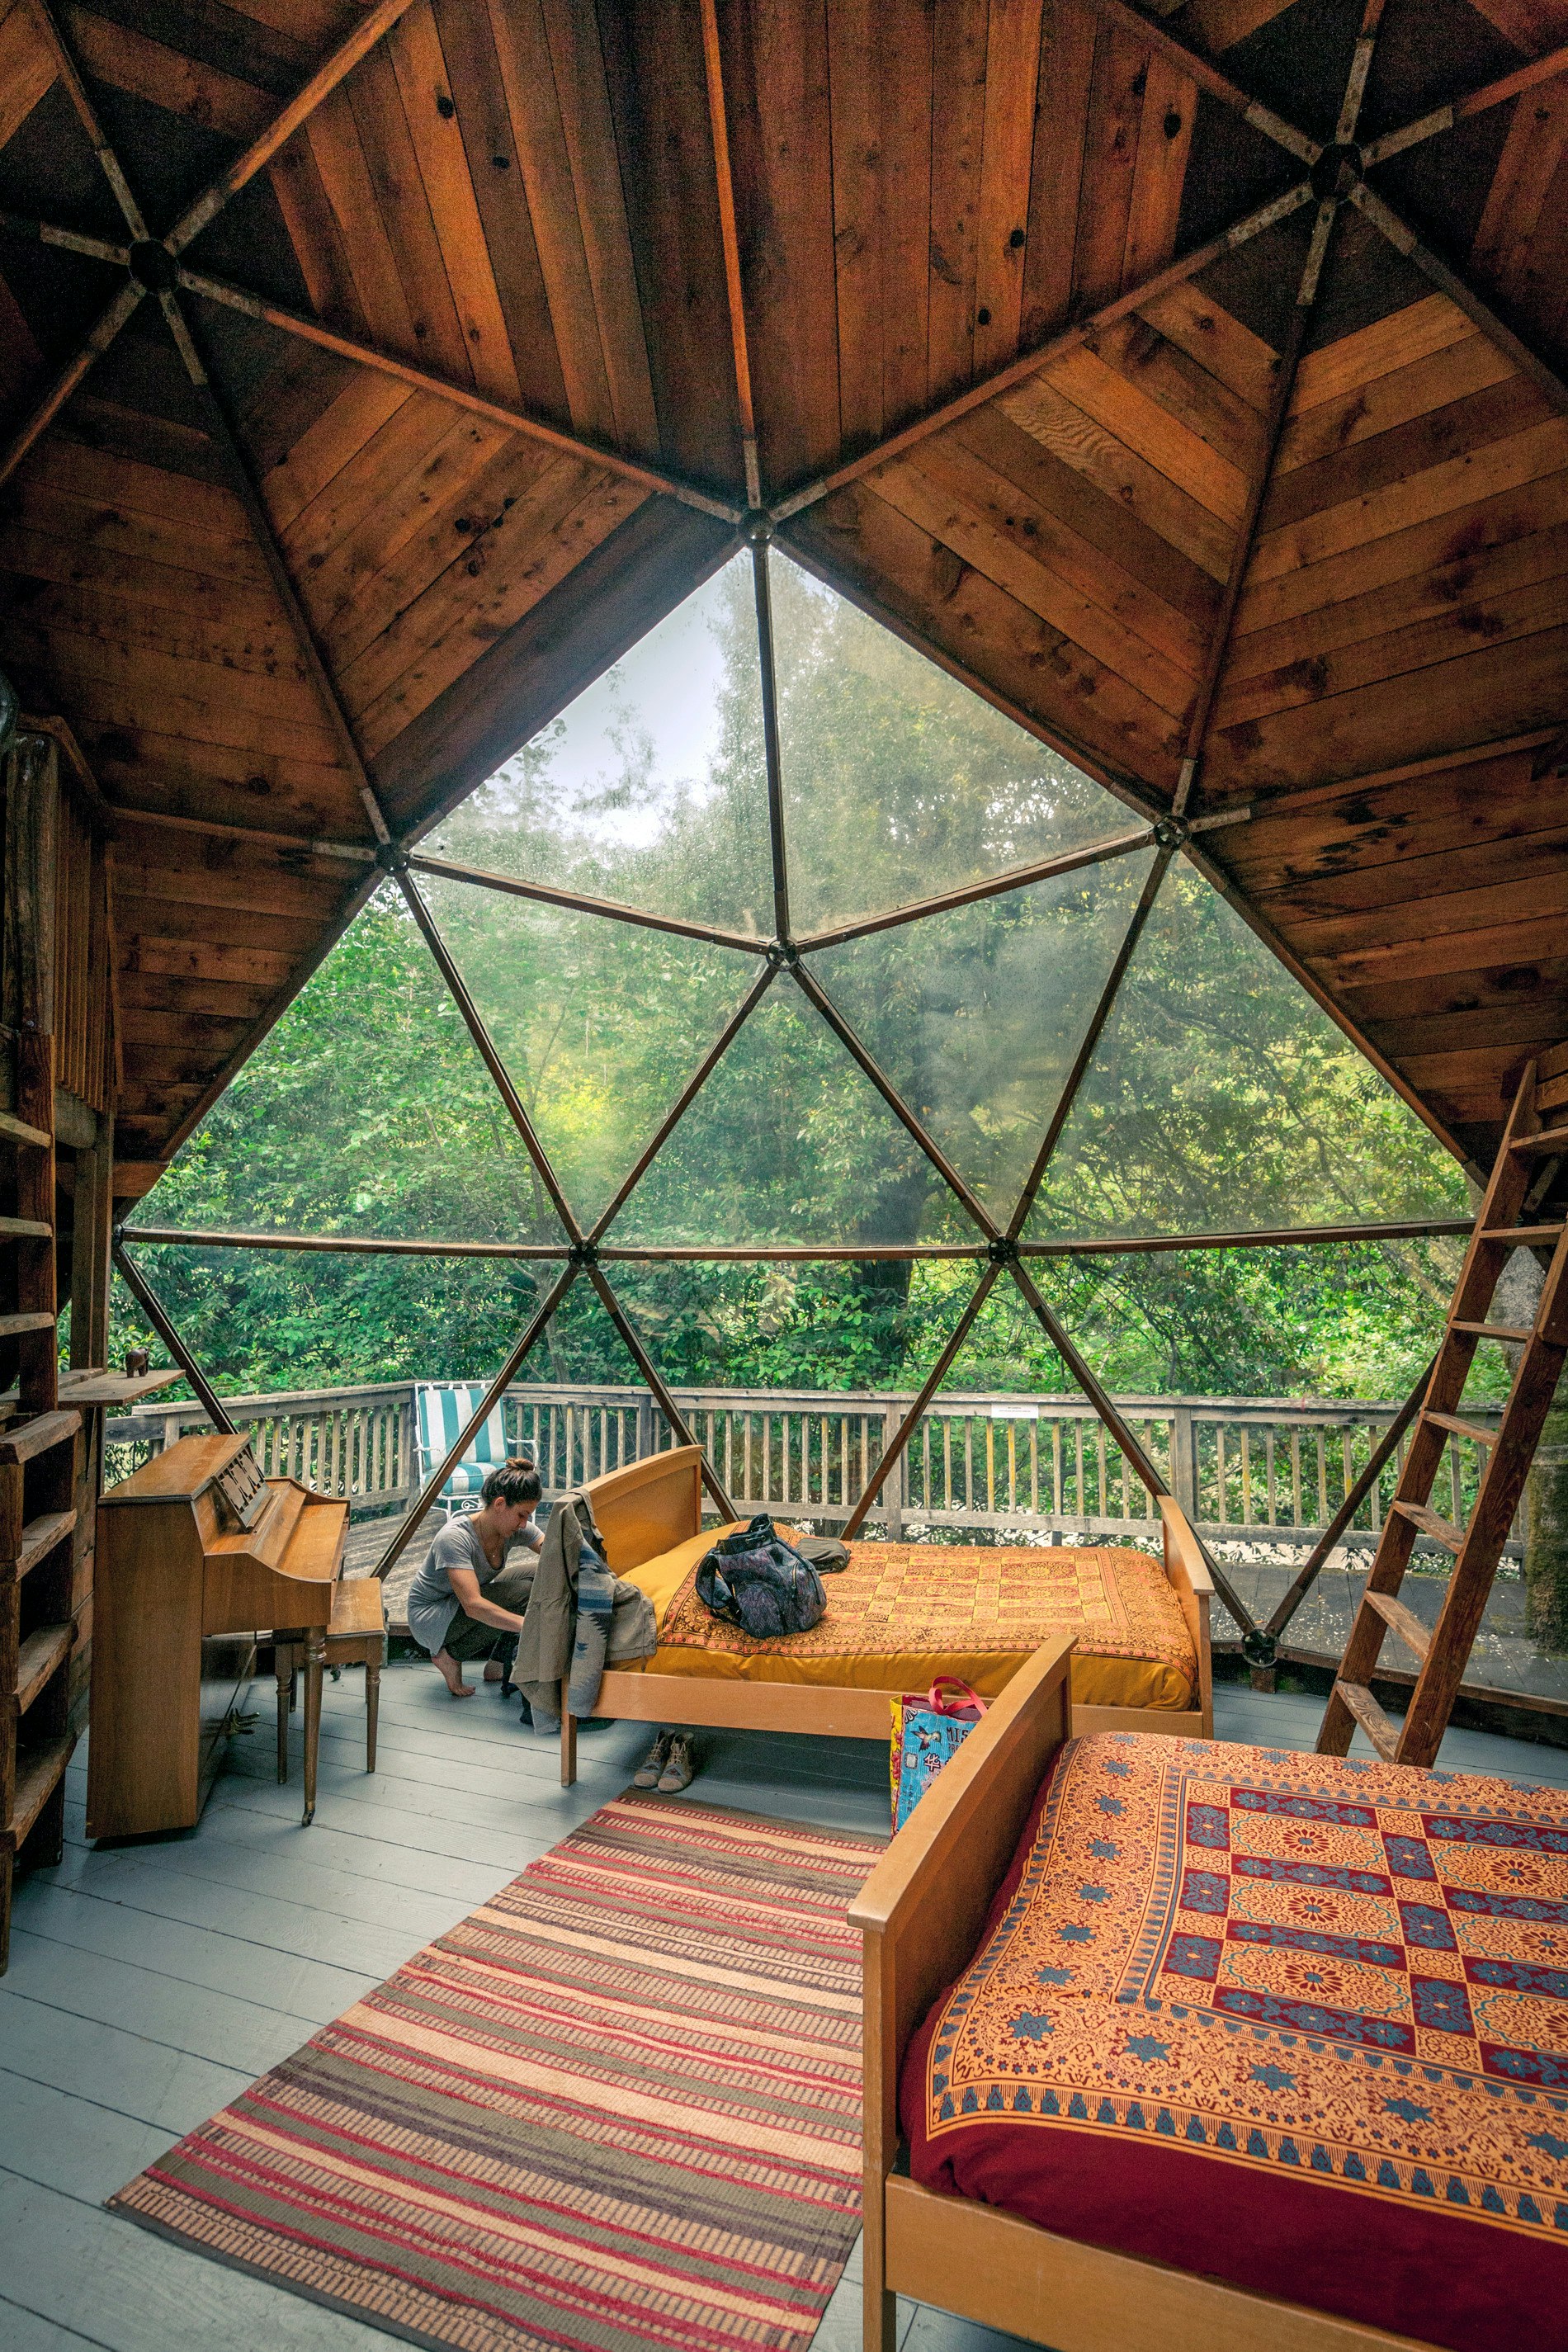 The inside of a wooden cabin. Large panes of glass make up some of the geodesic structure, creating a huge window. A woman is crouched down beside a double bed that has patchwork-printed linen. To the left is an upright piano.